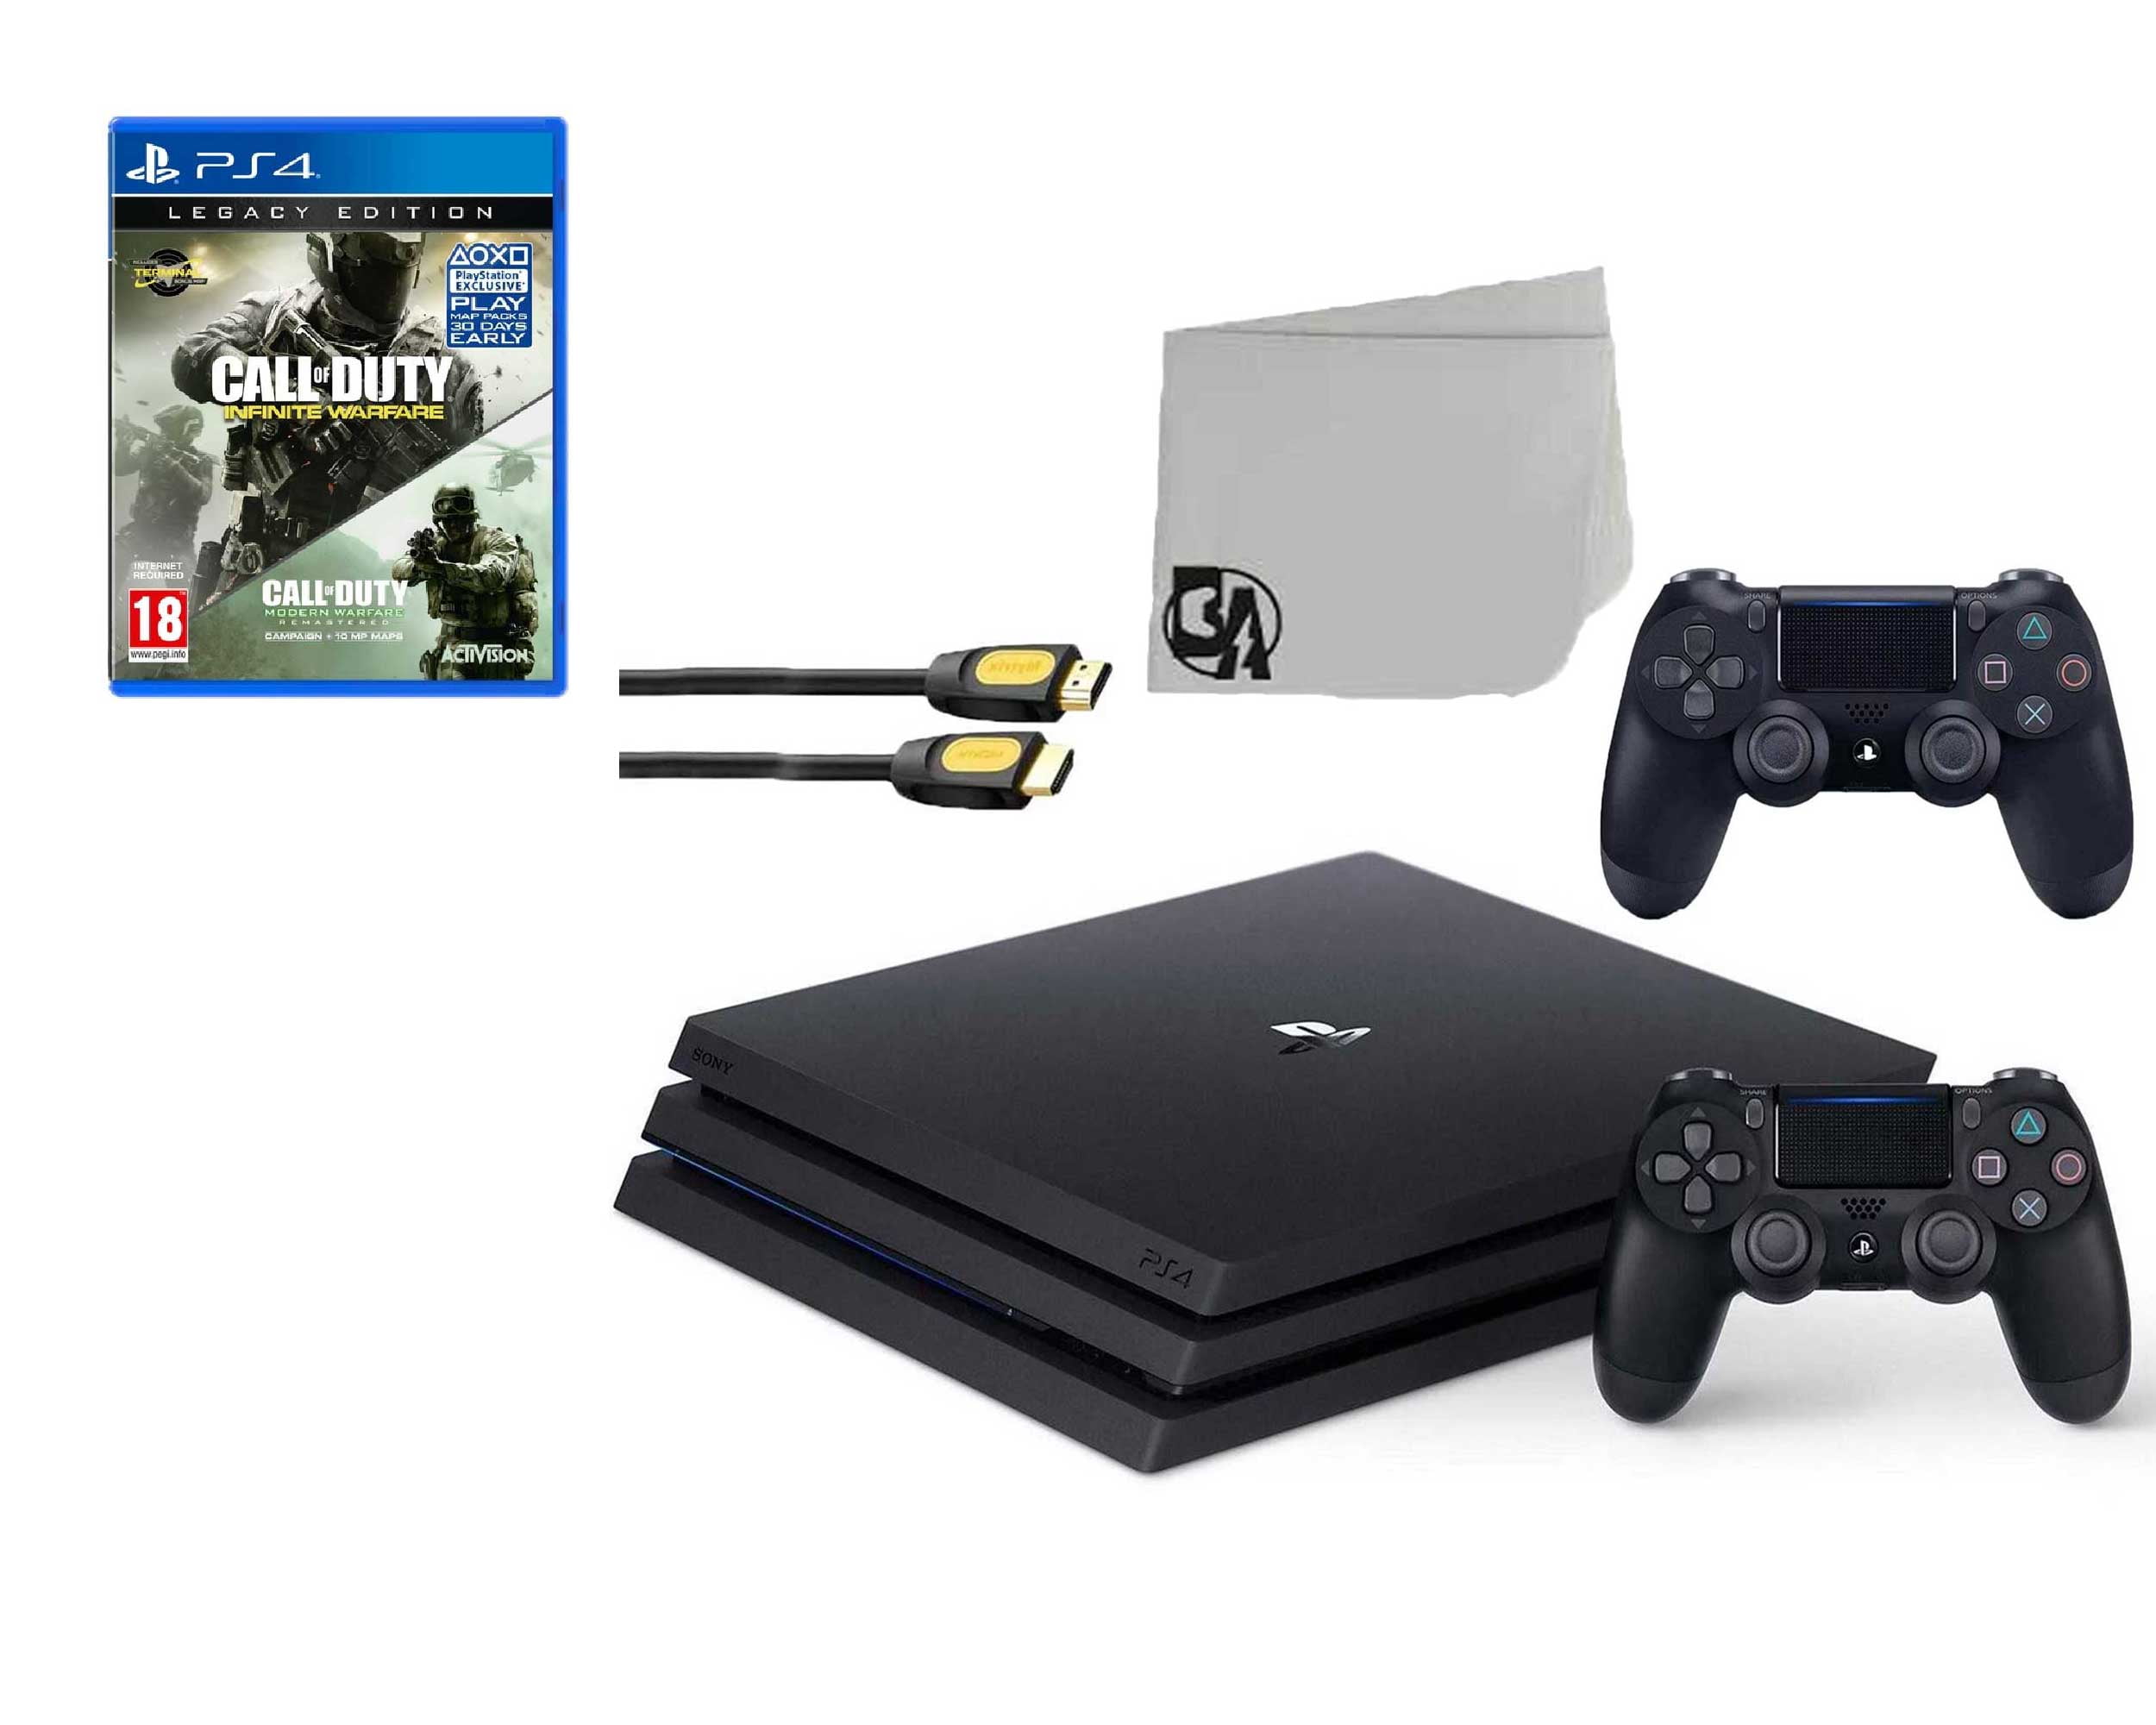 Sony PlayStation Pro 1TB Gaming Console Black 2 Controller Included with Call of Duty Black Ops 4 BOLT AXTION Bundle Like New - Walmart.com